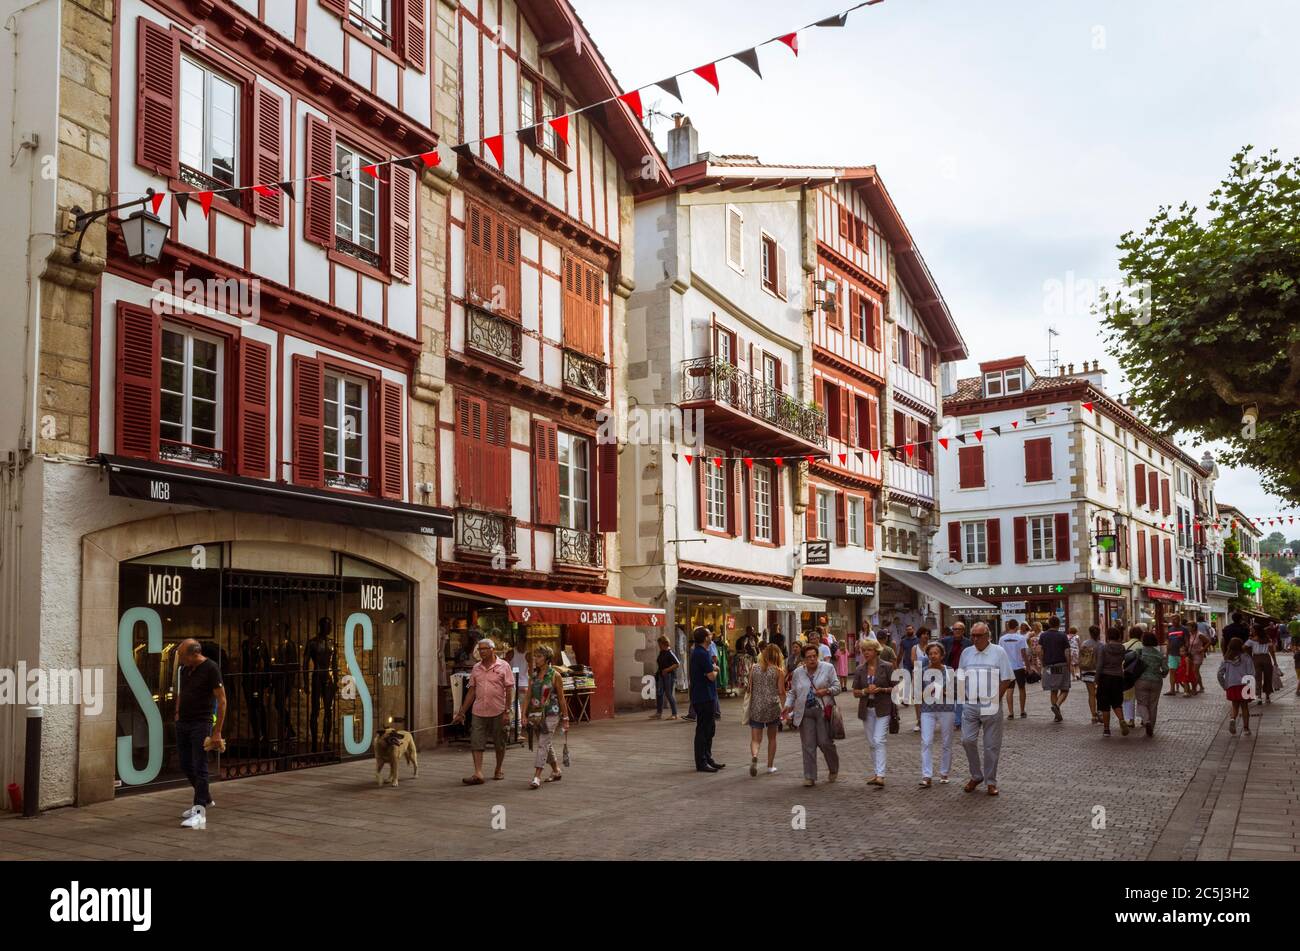 Saint Jean de Luz, French Basque Country, France - July 13th, 2019 : People walk past traditional buildings in the historic center of Saint Jean de Lu Stock Photo